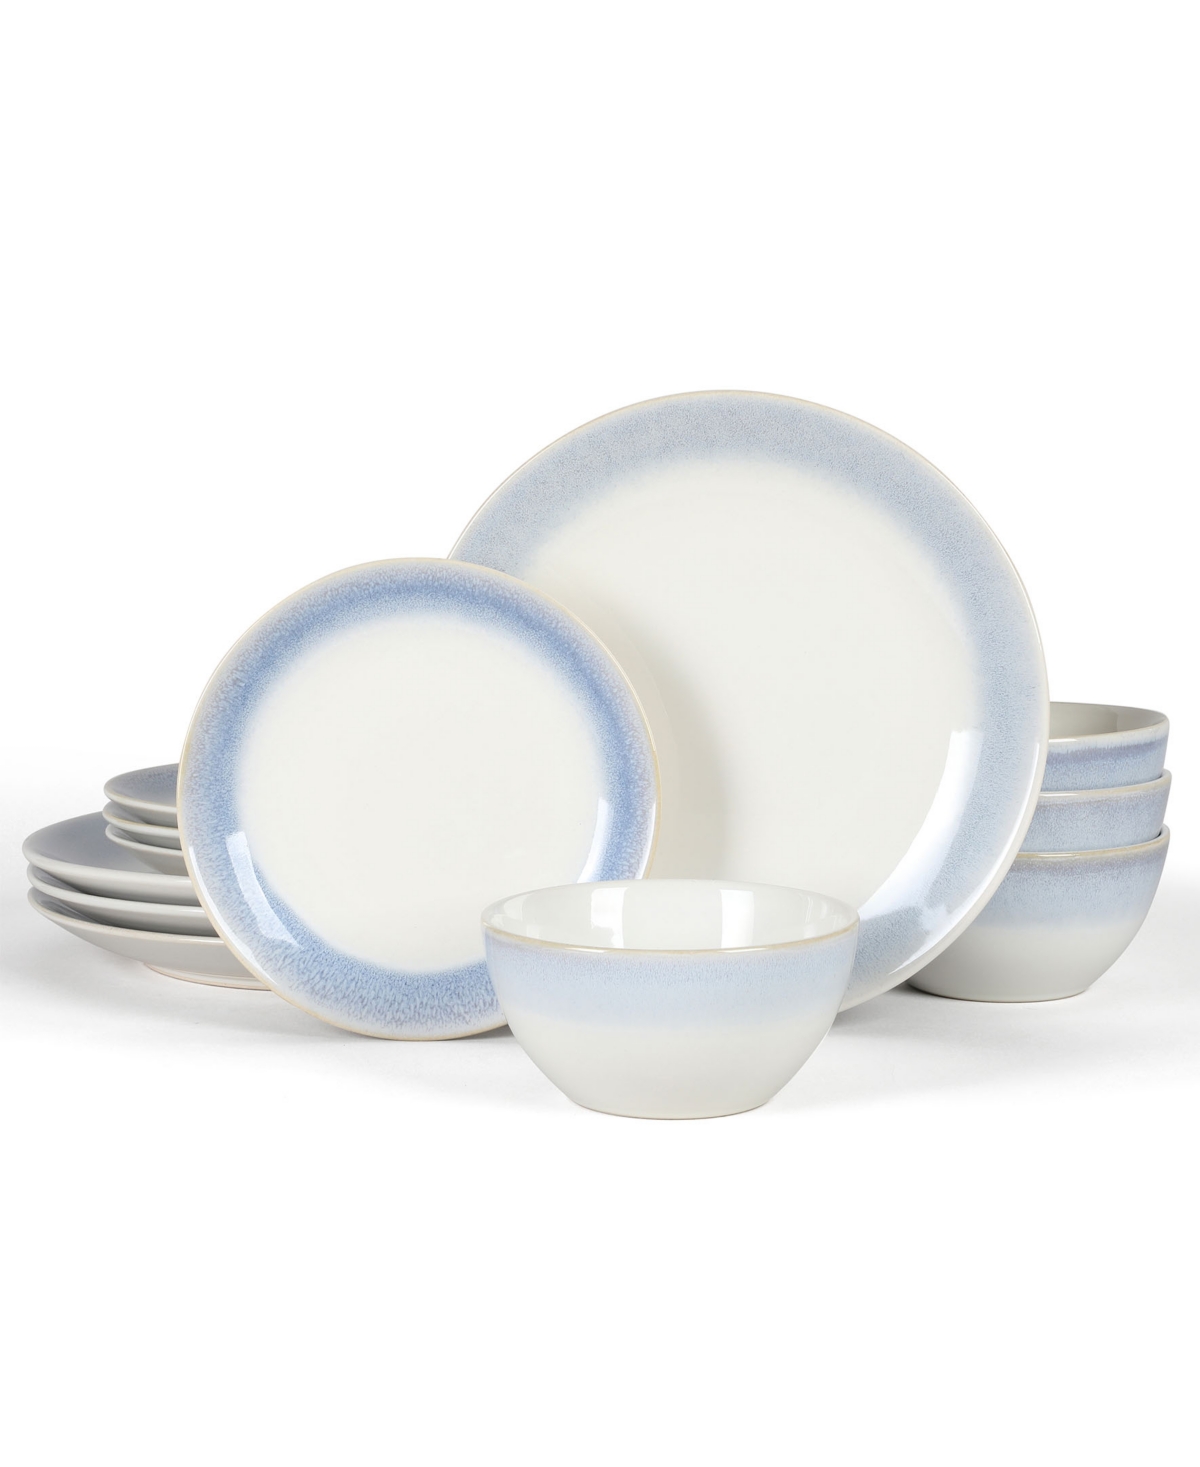 Perry Street 12 Piece Dinnerware Set, Service for 4 - White